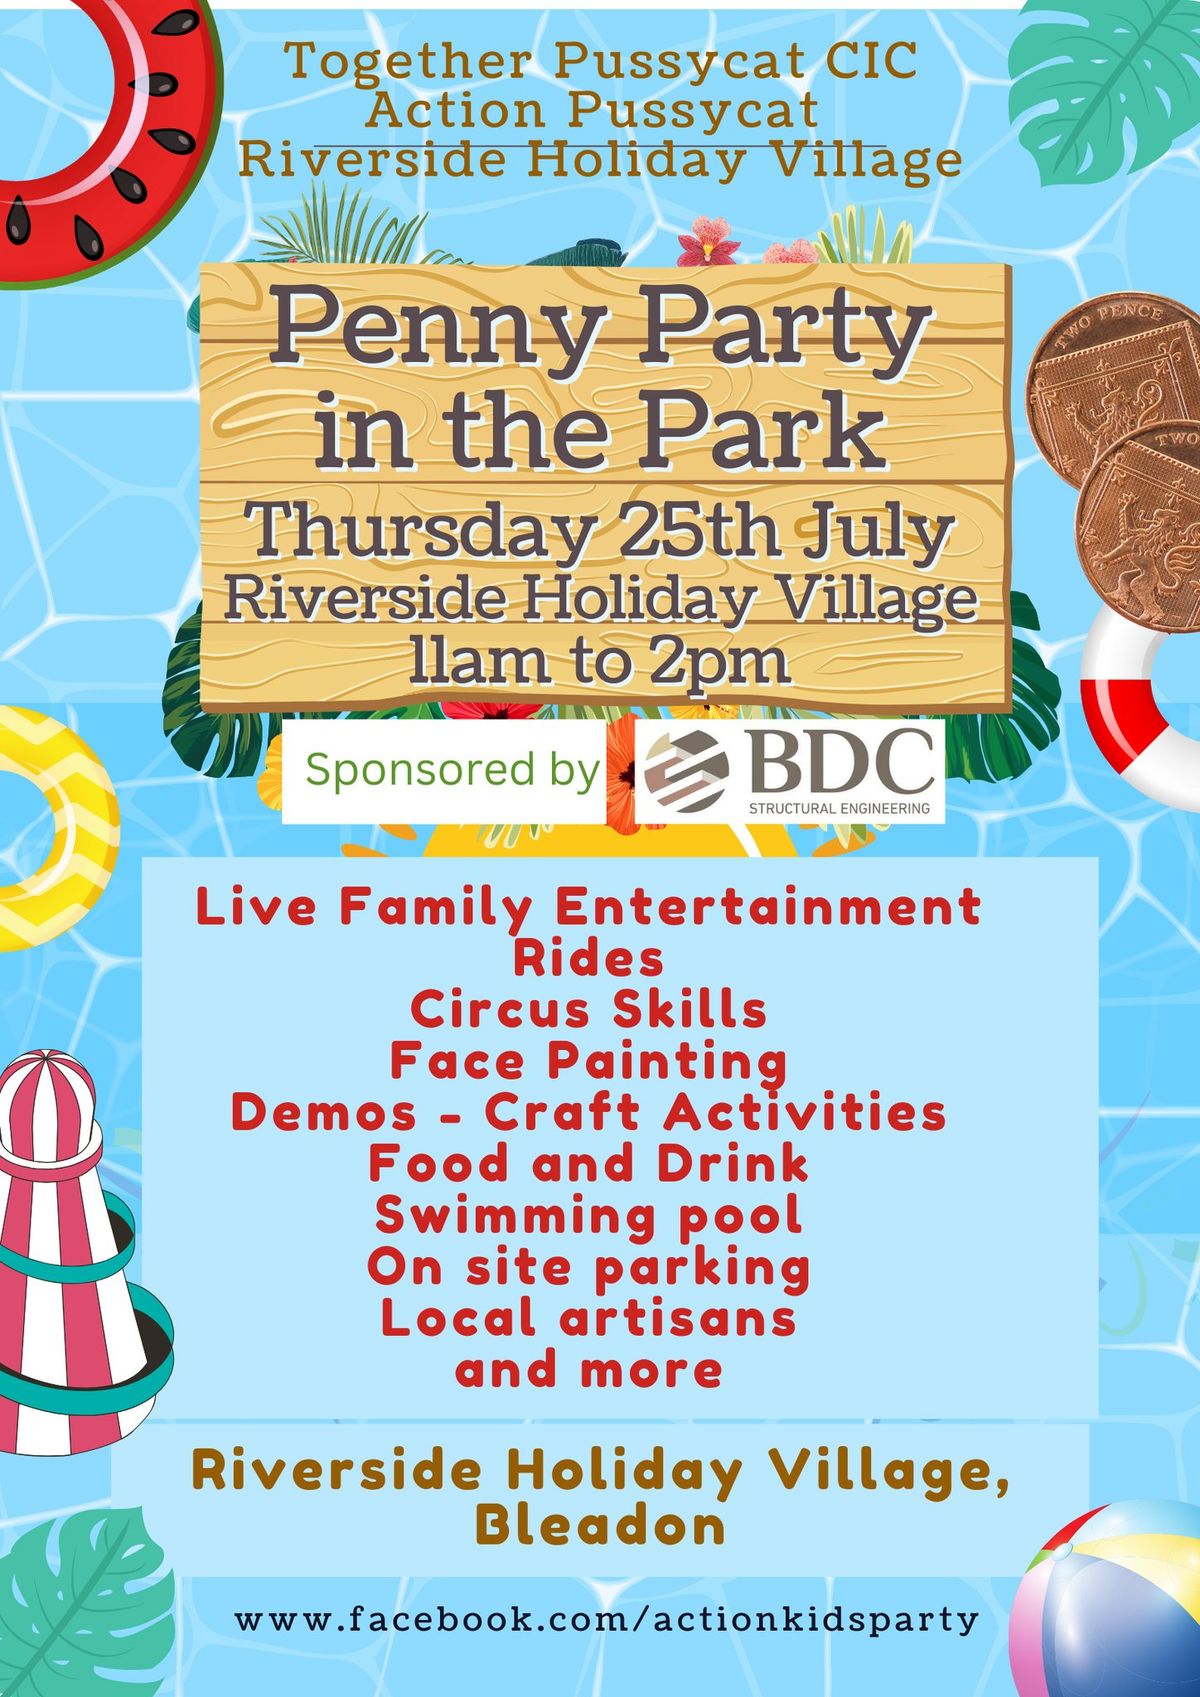 Penny Party in the Park